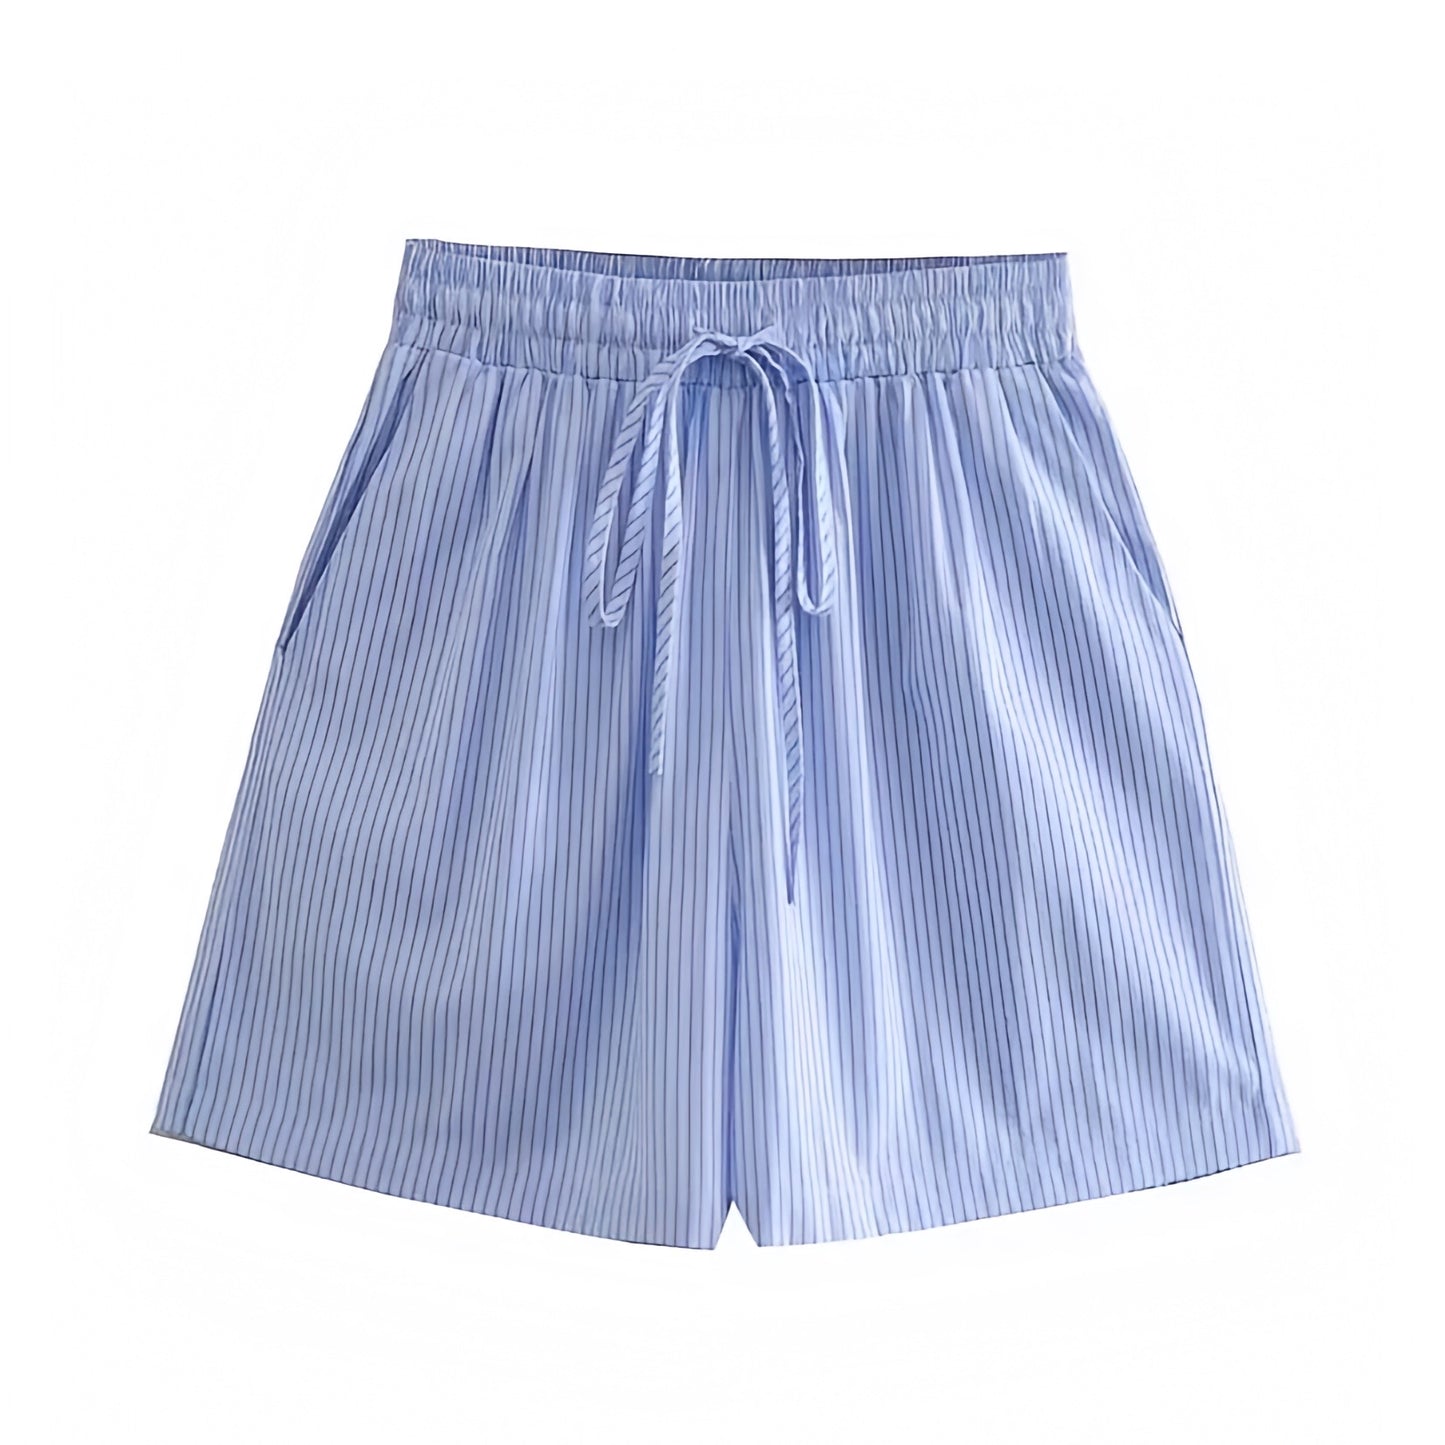 light-blue-striped-seersucker-pinstriped-patterned-draw-string-fitted-waist-mid-high-rise-waisted-cotton-linen-short-shorts-with-pockets-women-ladies-chic-trendy-spring-2024-summer-elegant-casual-feminine-preppy-style-coastal-granddaughter-european-vacation-beach-wear-zara-brandy-melville-pacsun-urban-outfitters-edikted